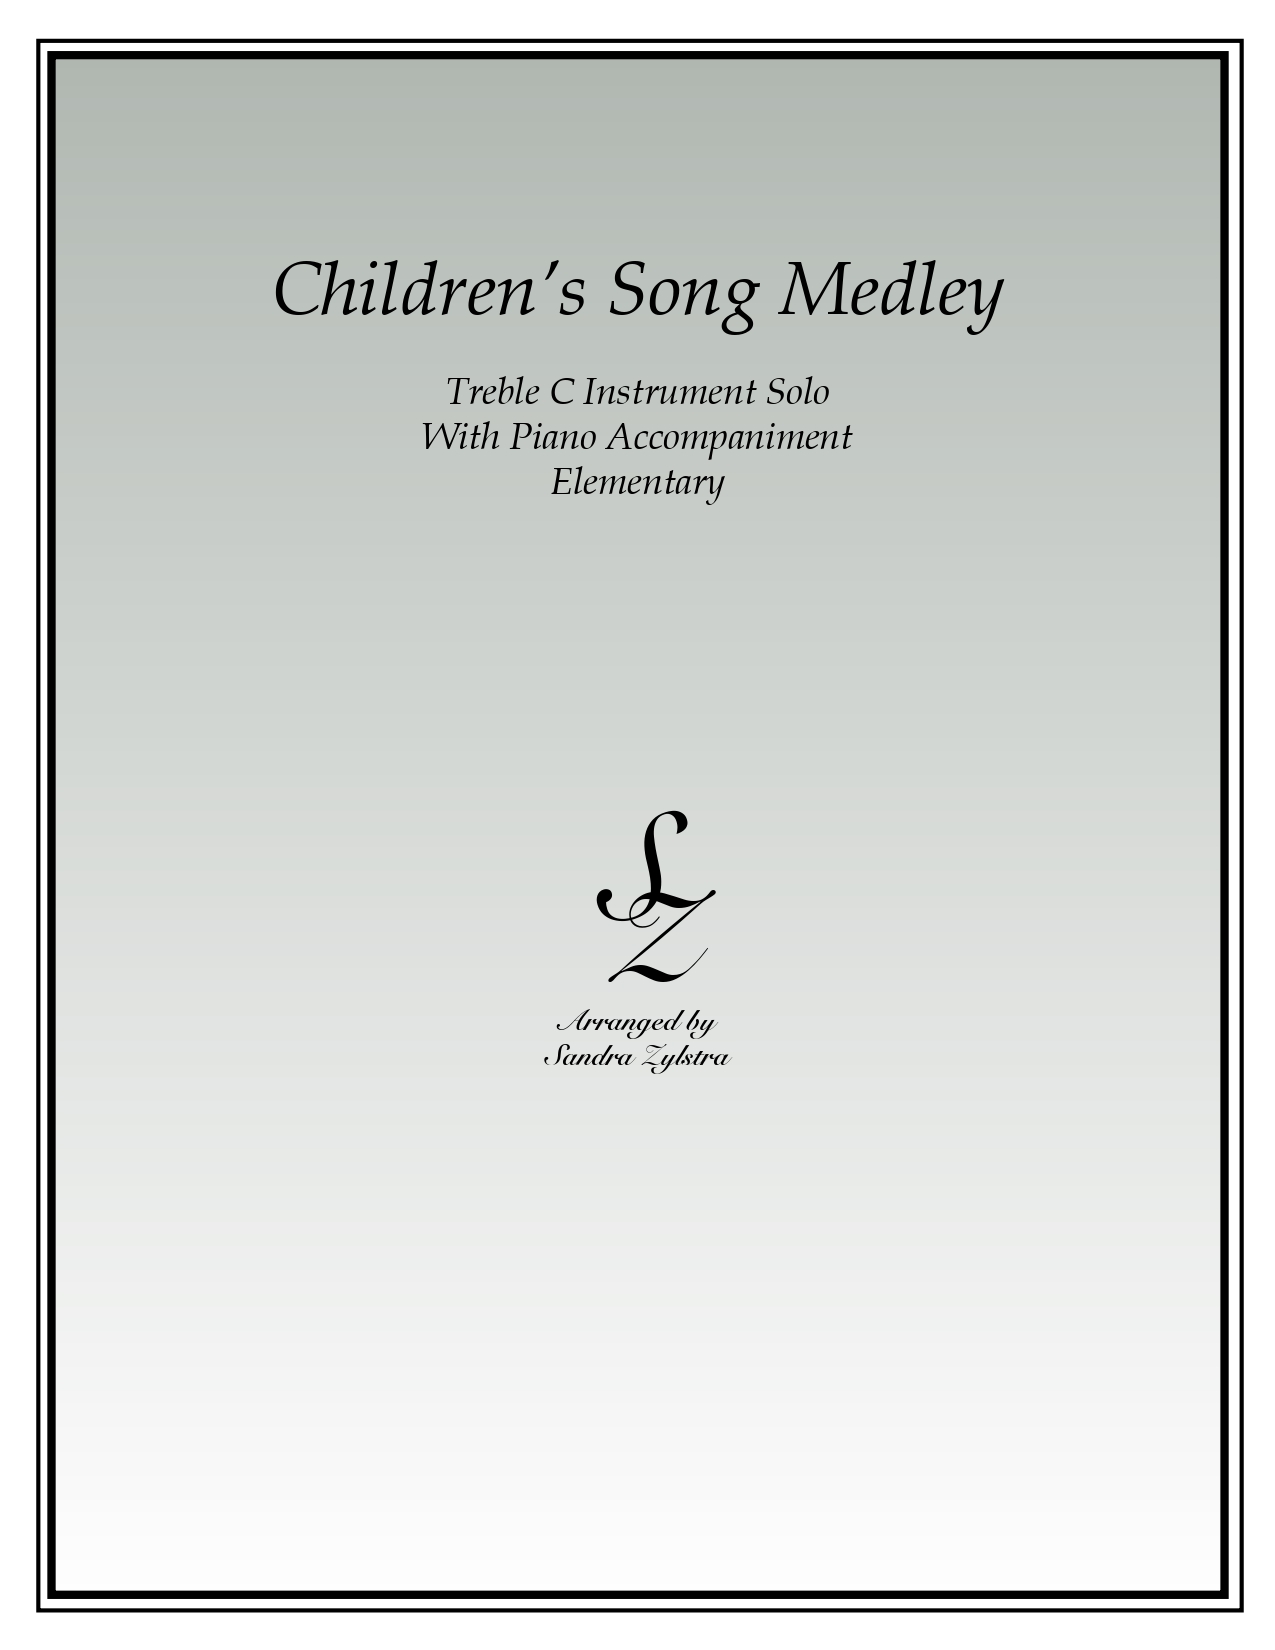 Childrens Song Medley treble C instrument solo part cover page 00011